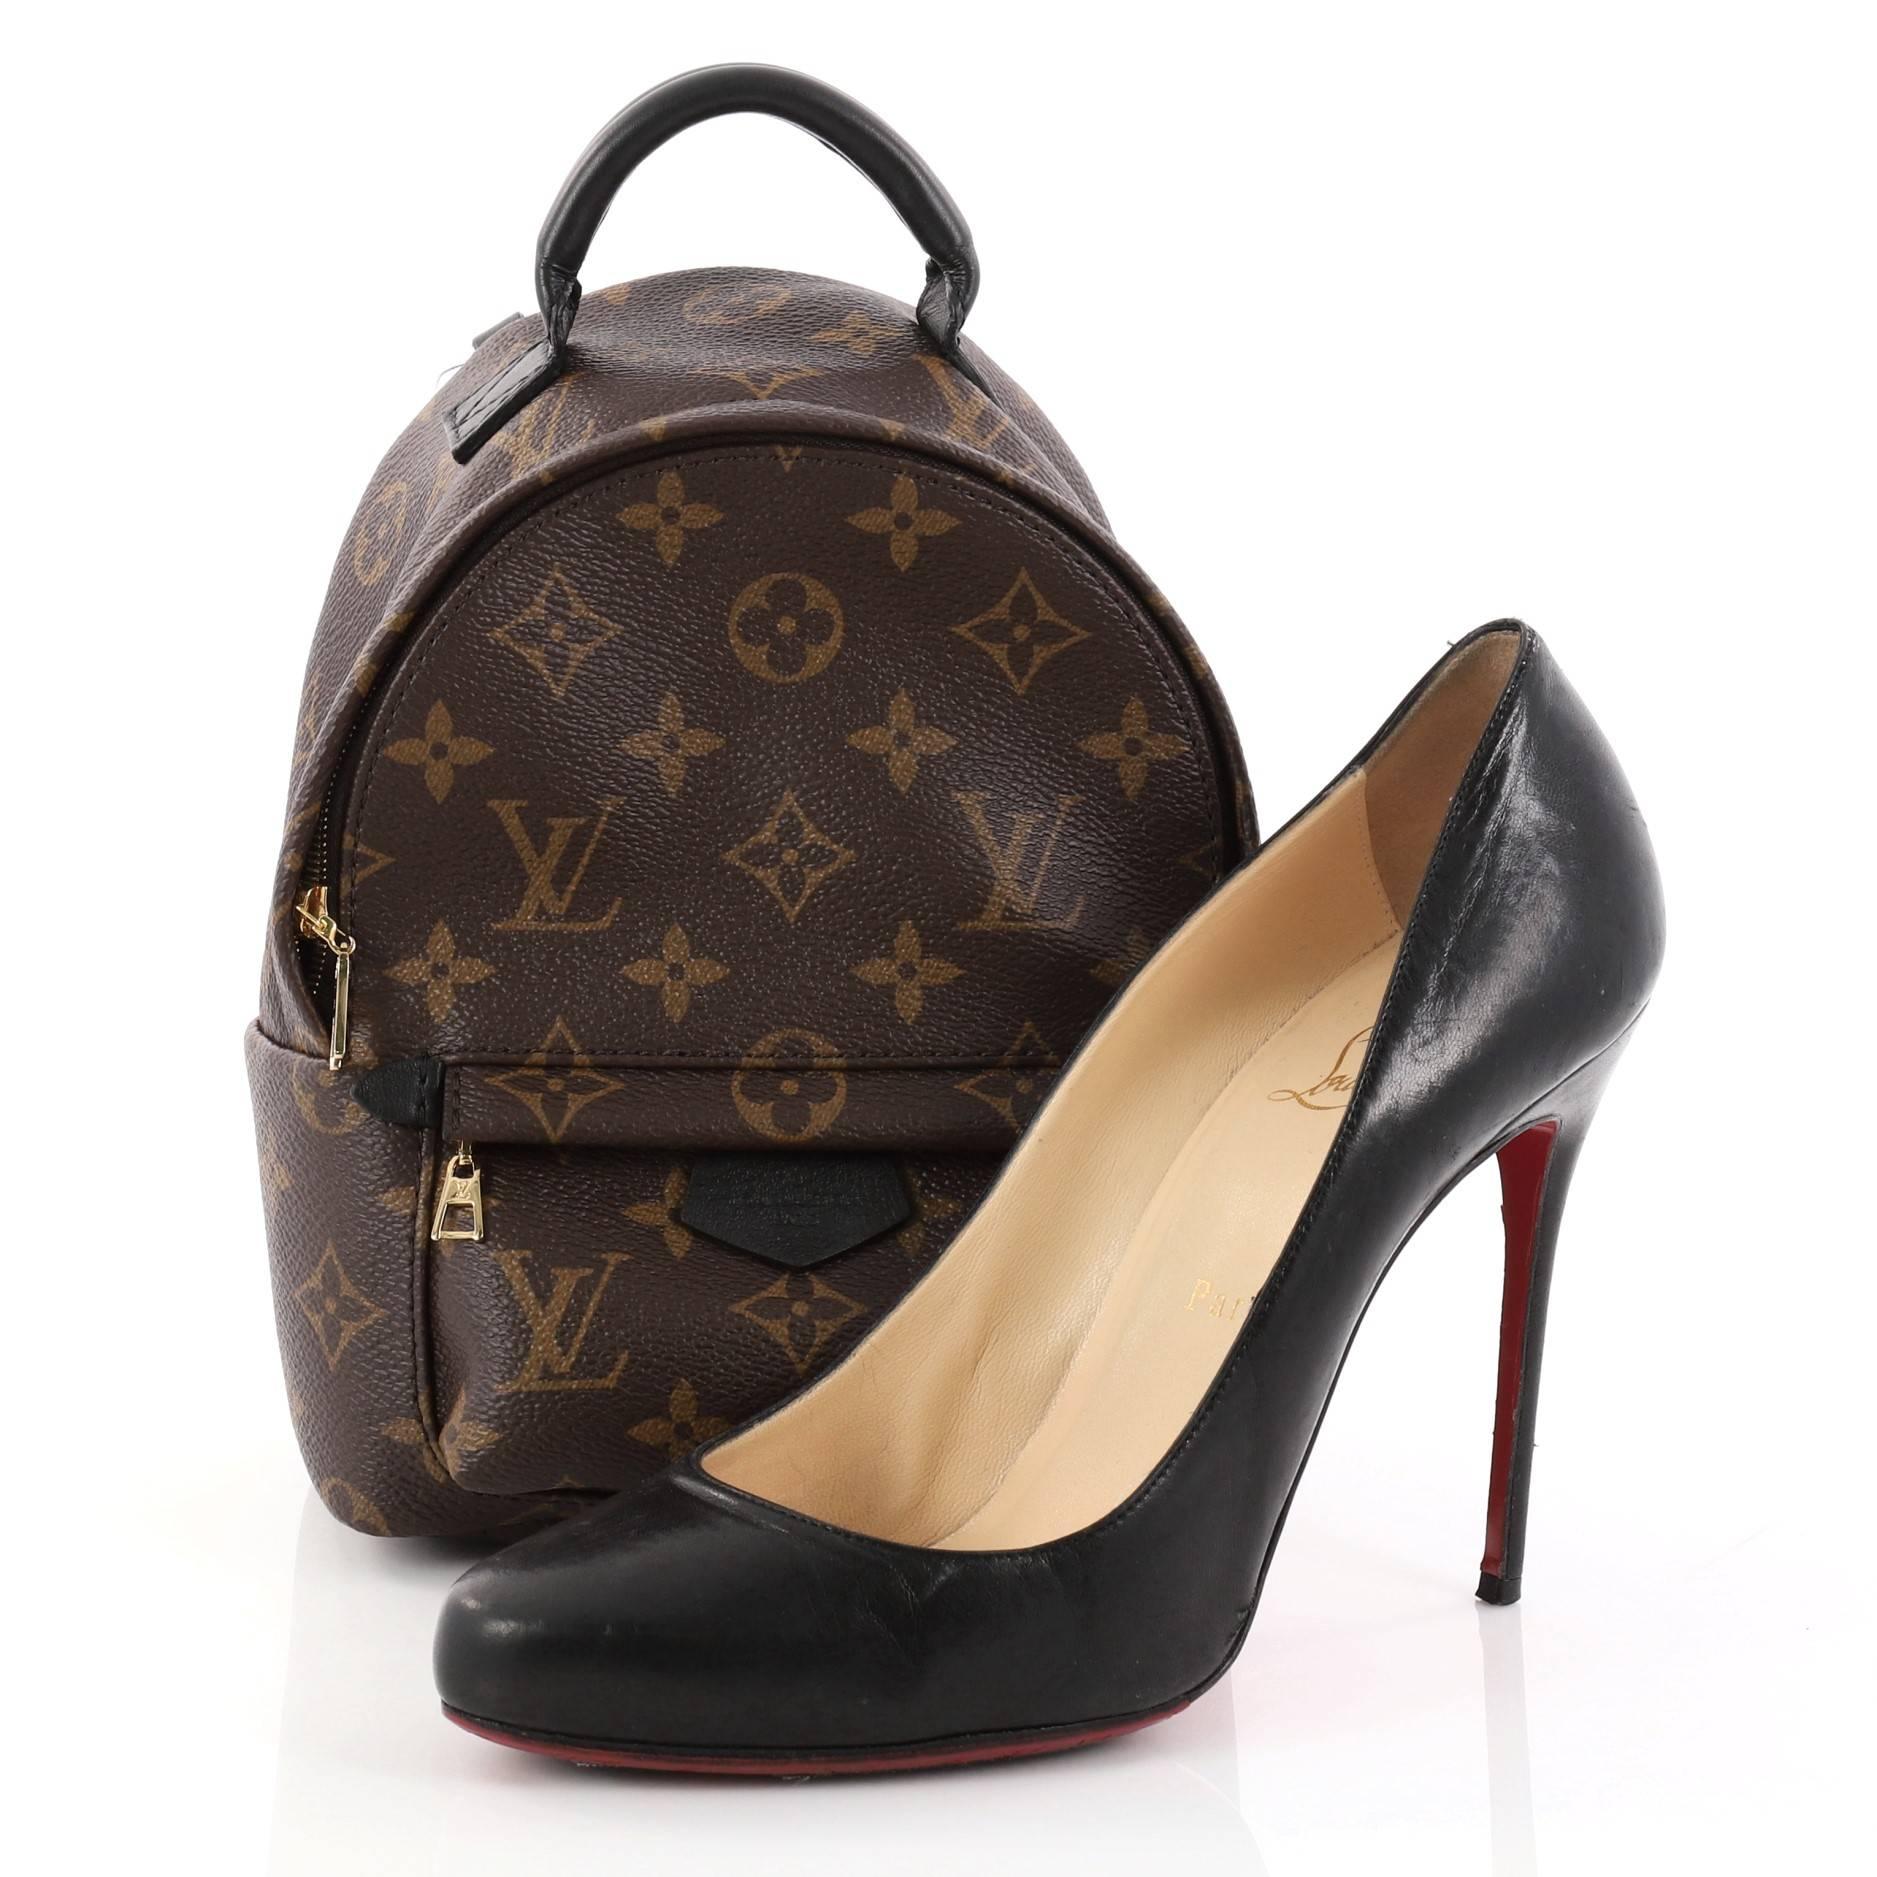 This authentic Louis Vuitton Palm Springs Backpack Monogram Canvas Mini is a stand-out piece made for care-free urban fashionistas. Crafted from brown monogram coated canvas, this chic functional backpack features padded leather top handle,